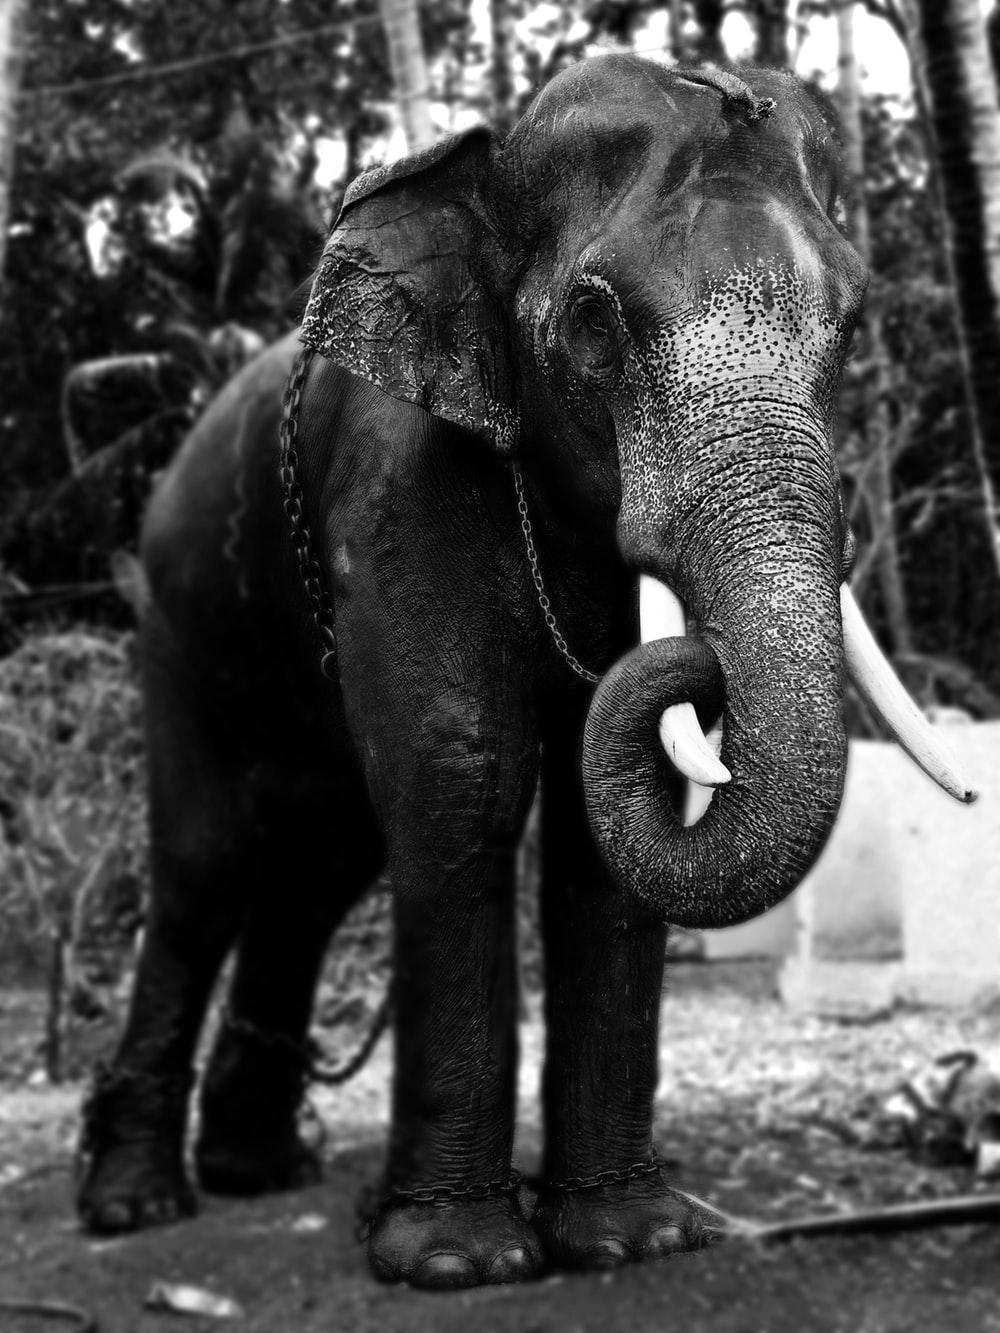 Indian Elephant Picture. Download Free Image & Stock